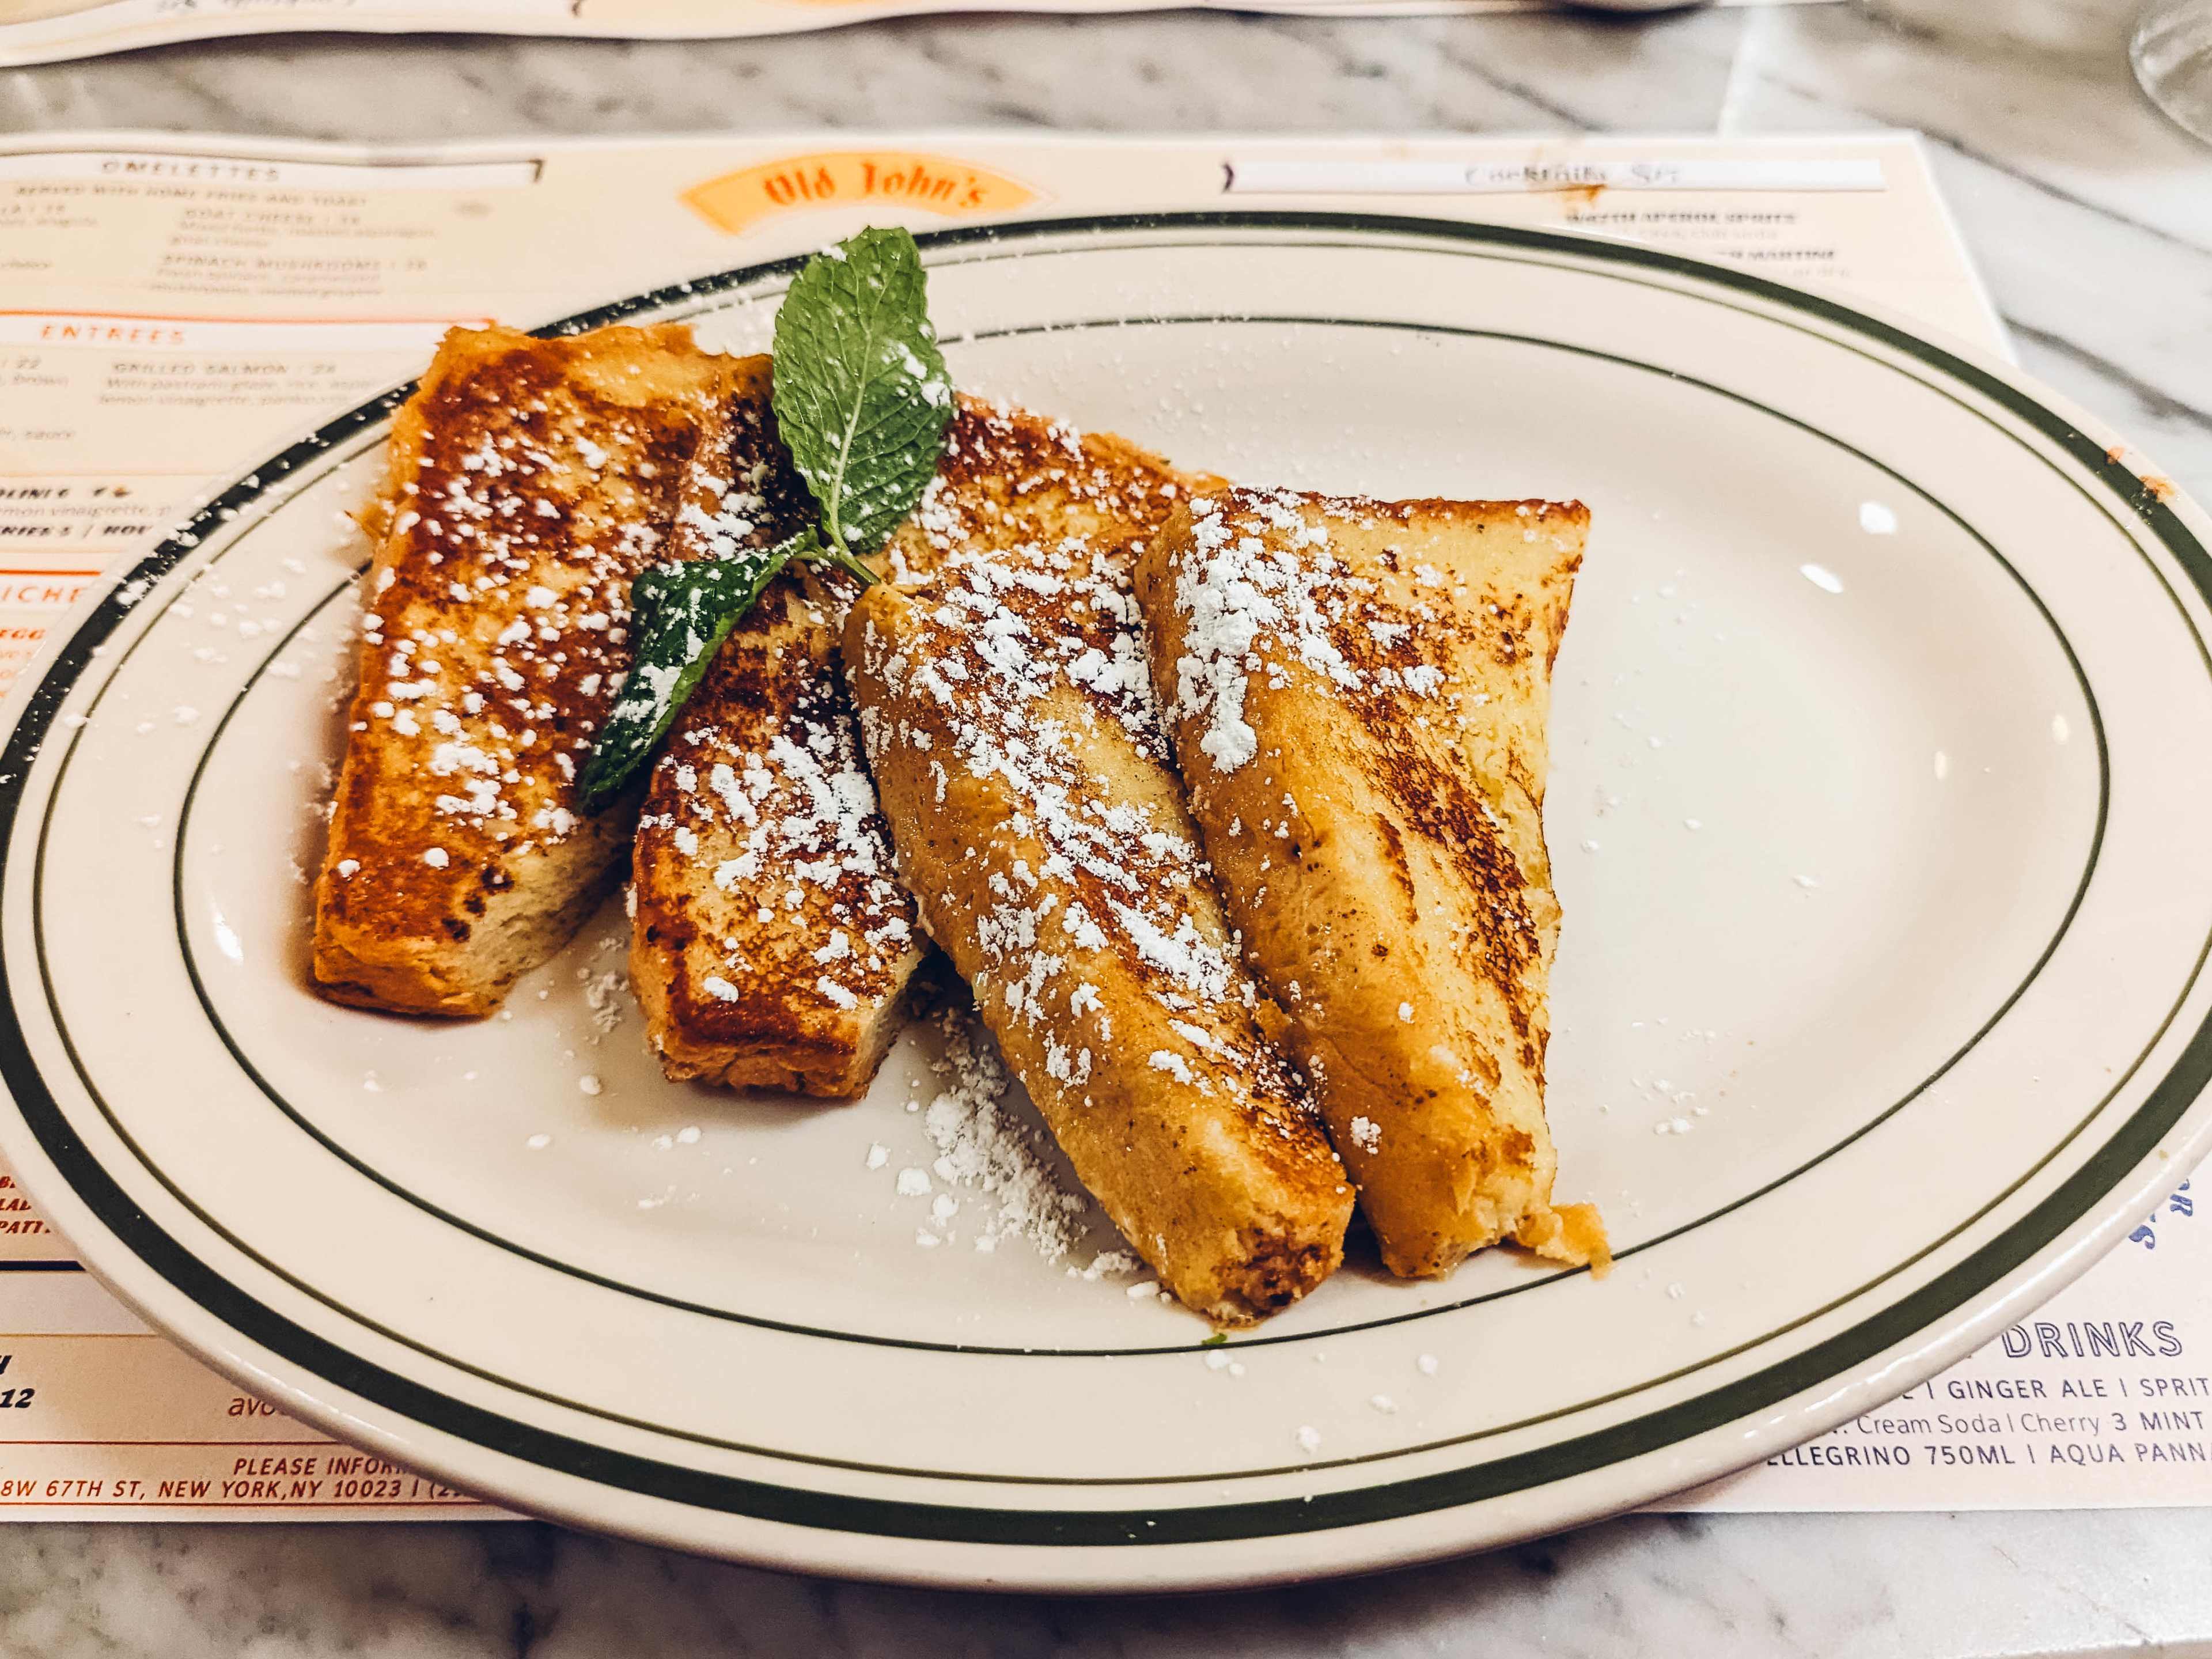 four half-slices of French toast with powdered sugar and a sprig of mint